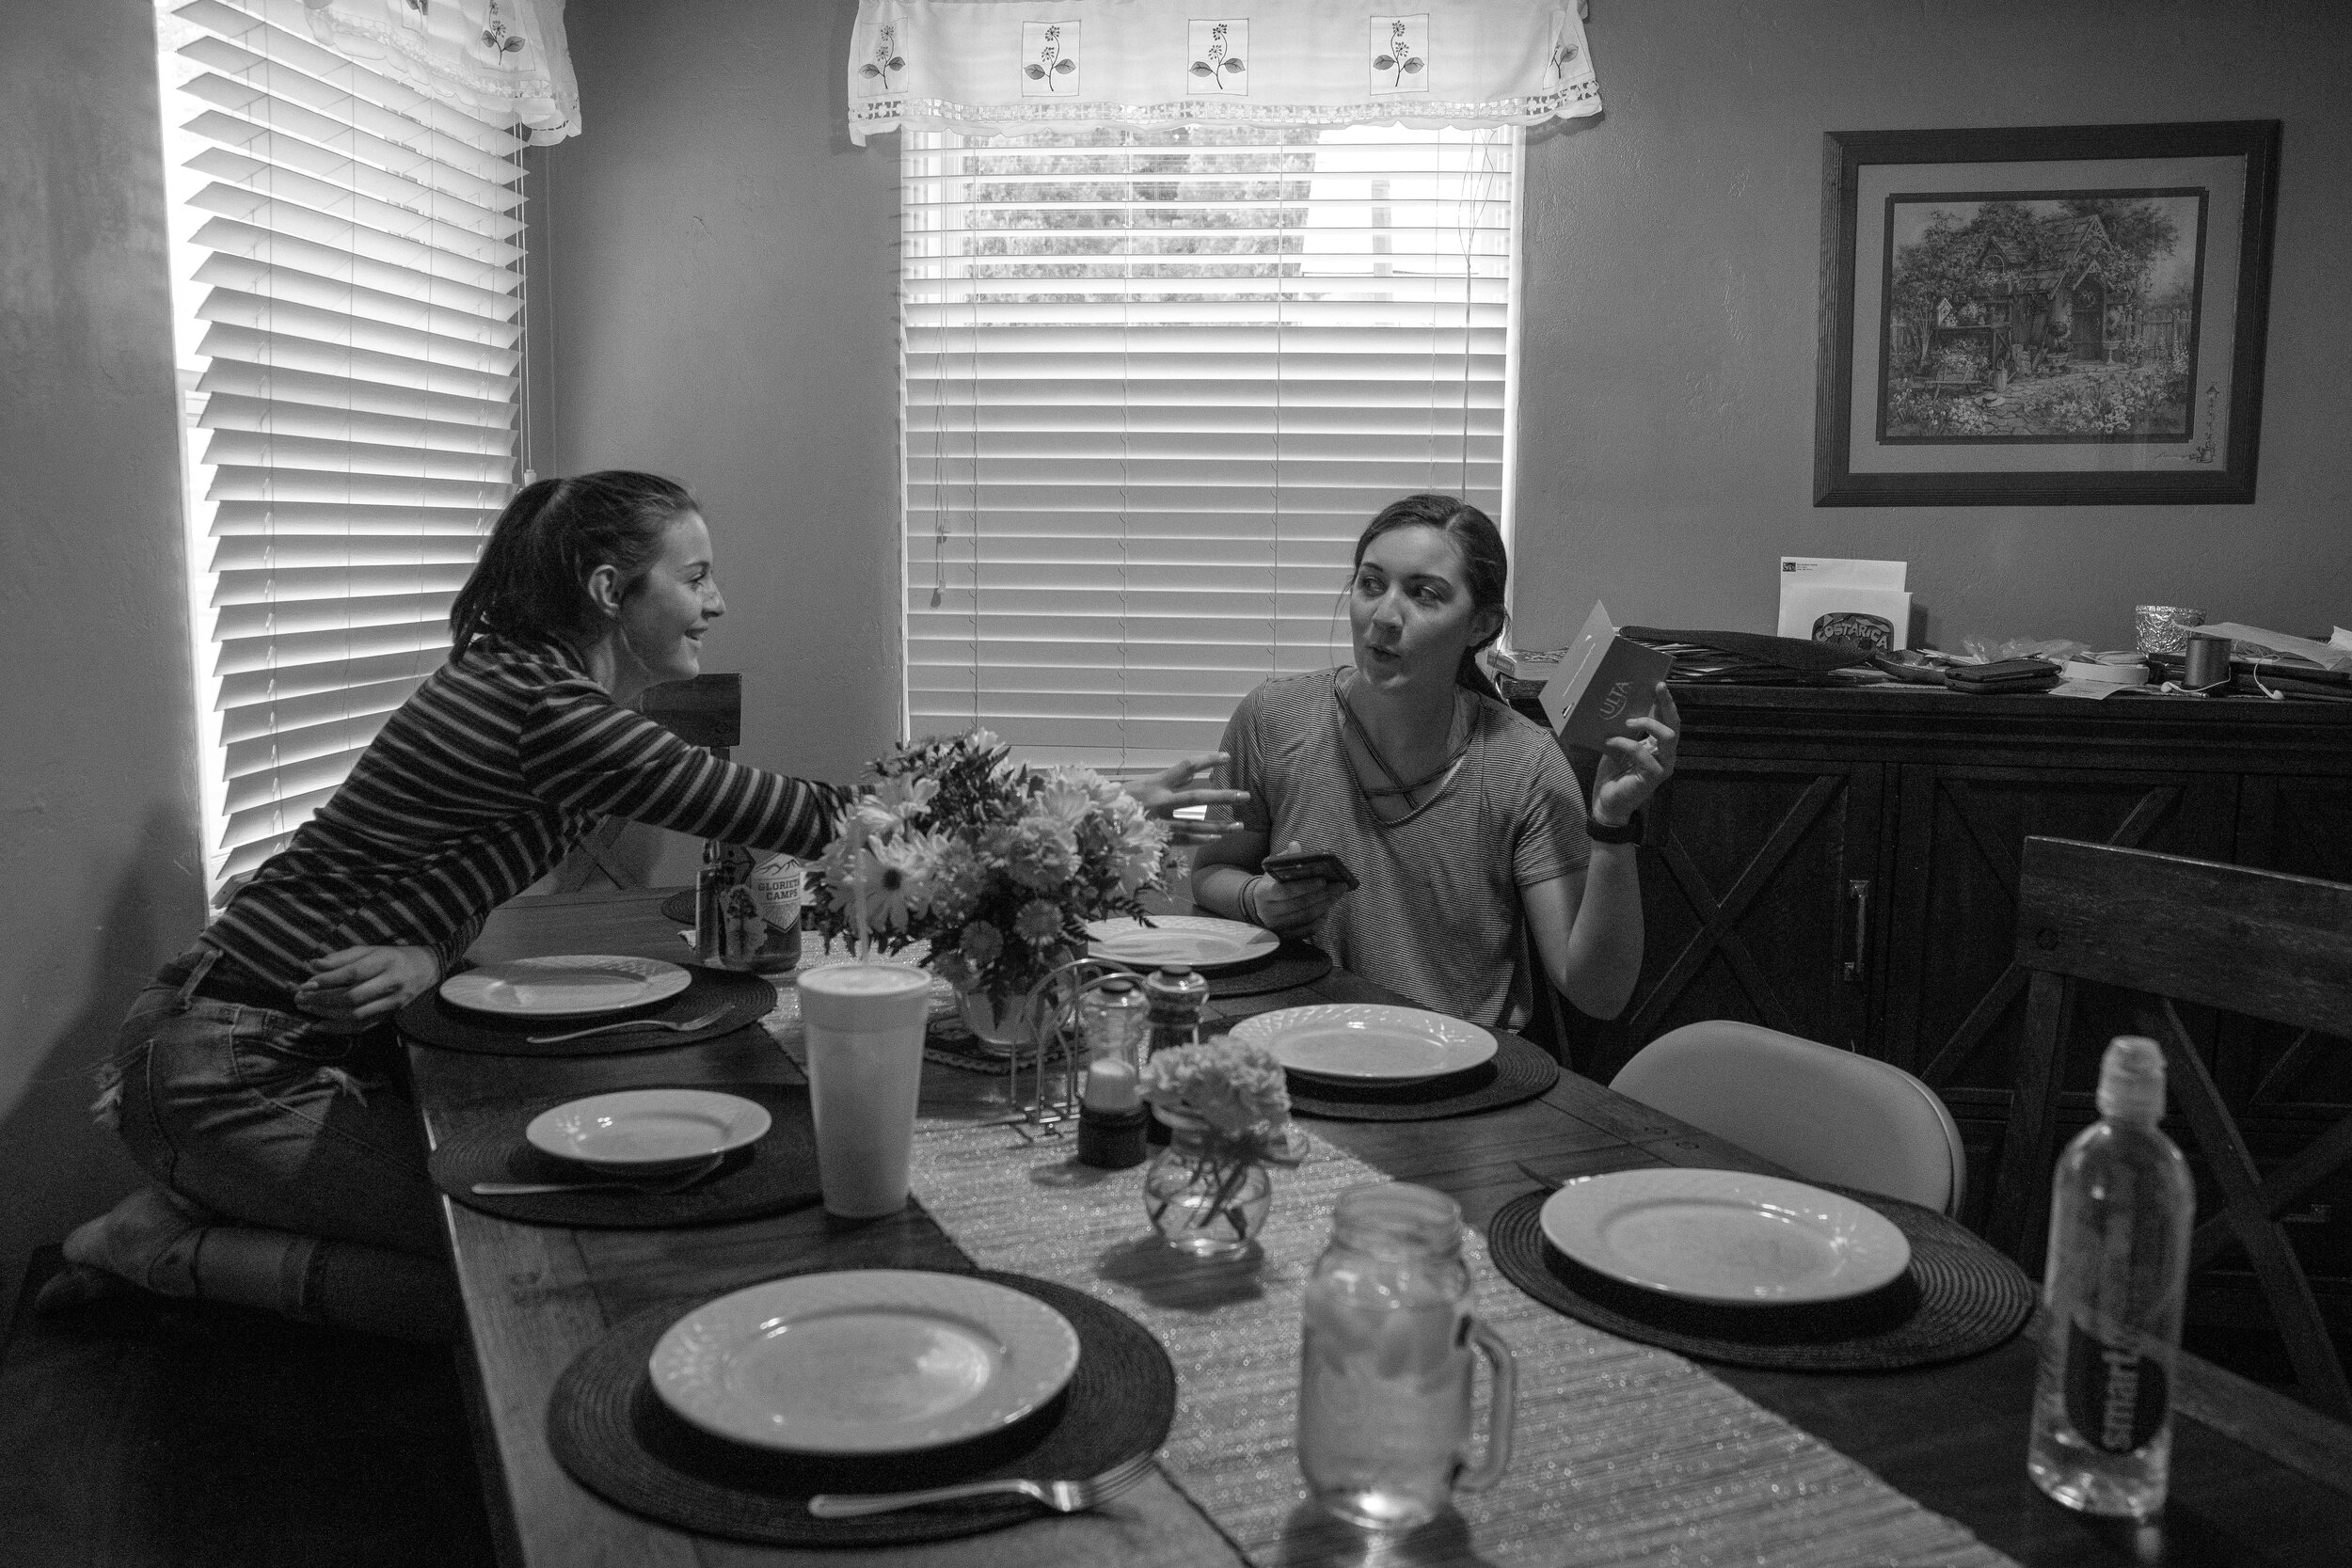  Sierra teases her younger sister Daniella before dinner by taking away her birthday present. The family celebrated an early birthday dinner for Daniella while her oldest sisters were still in town. 